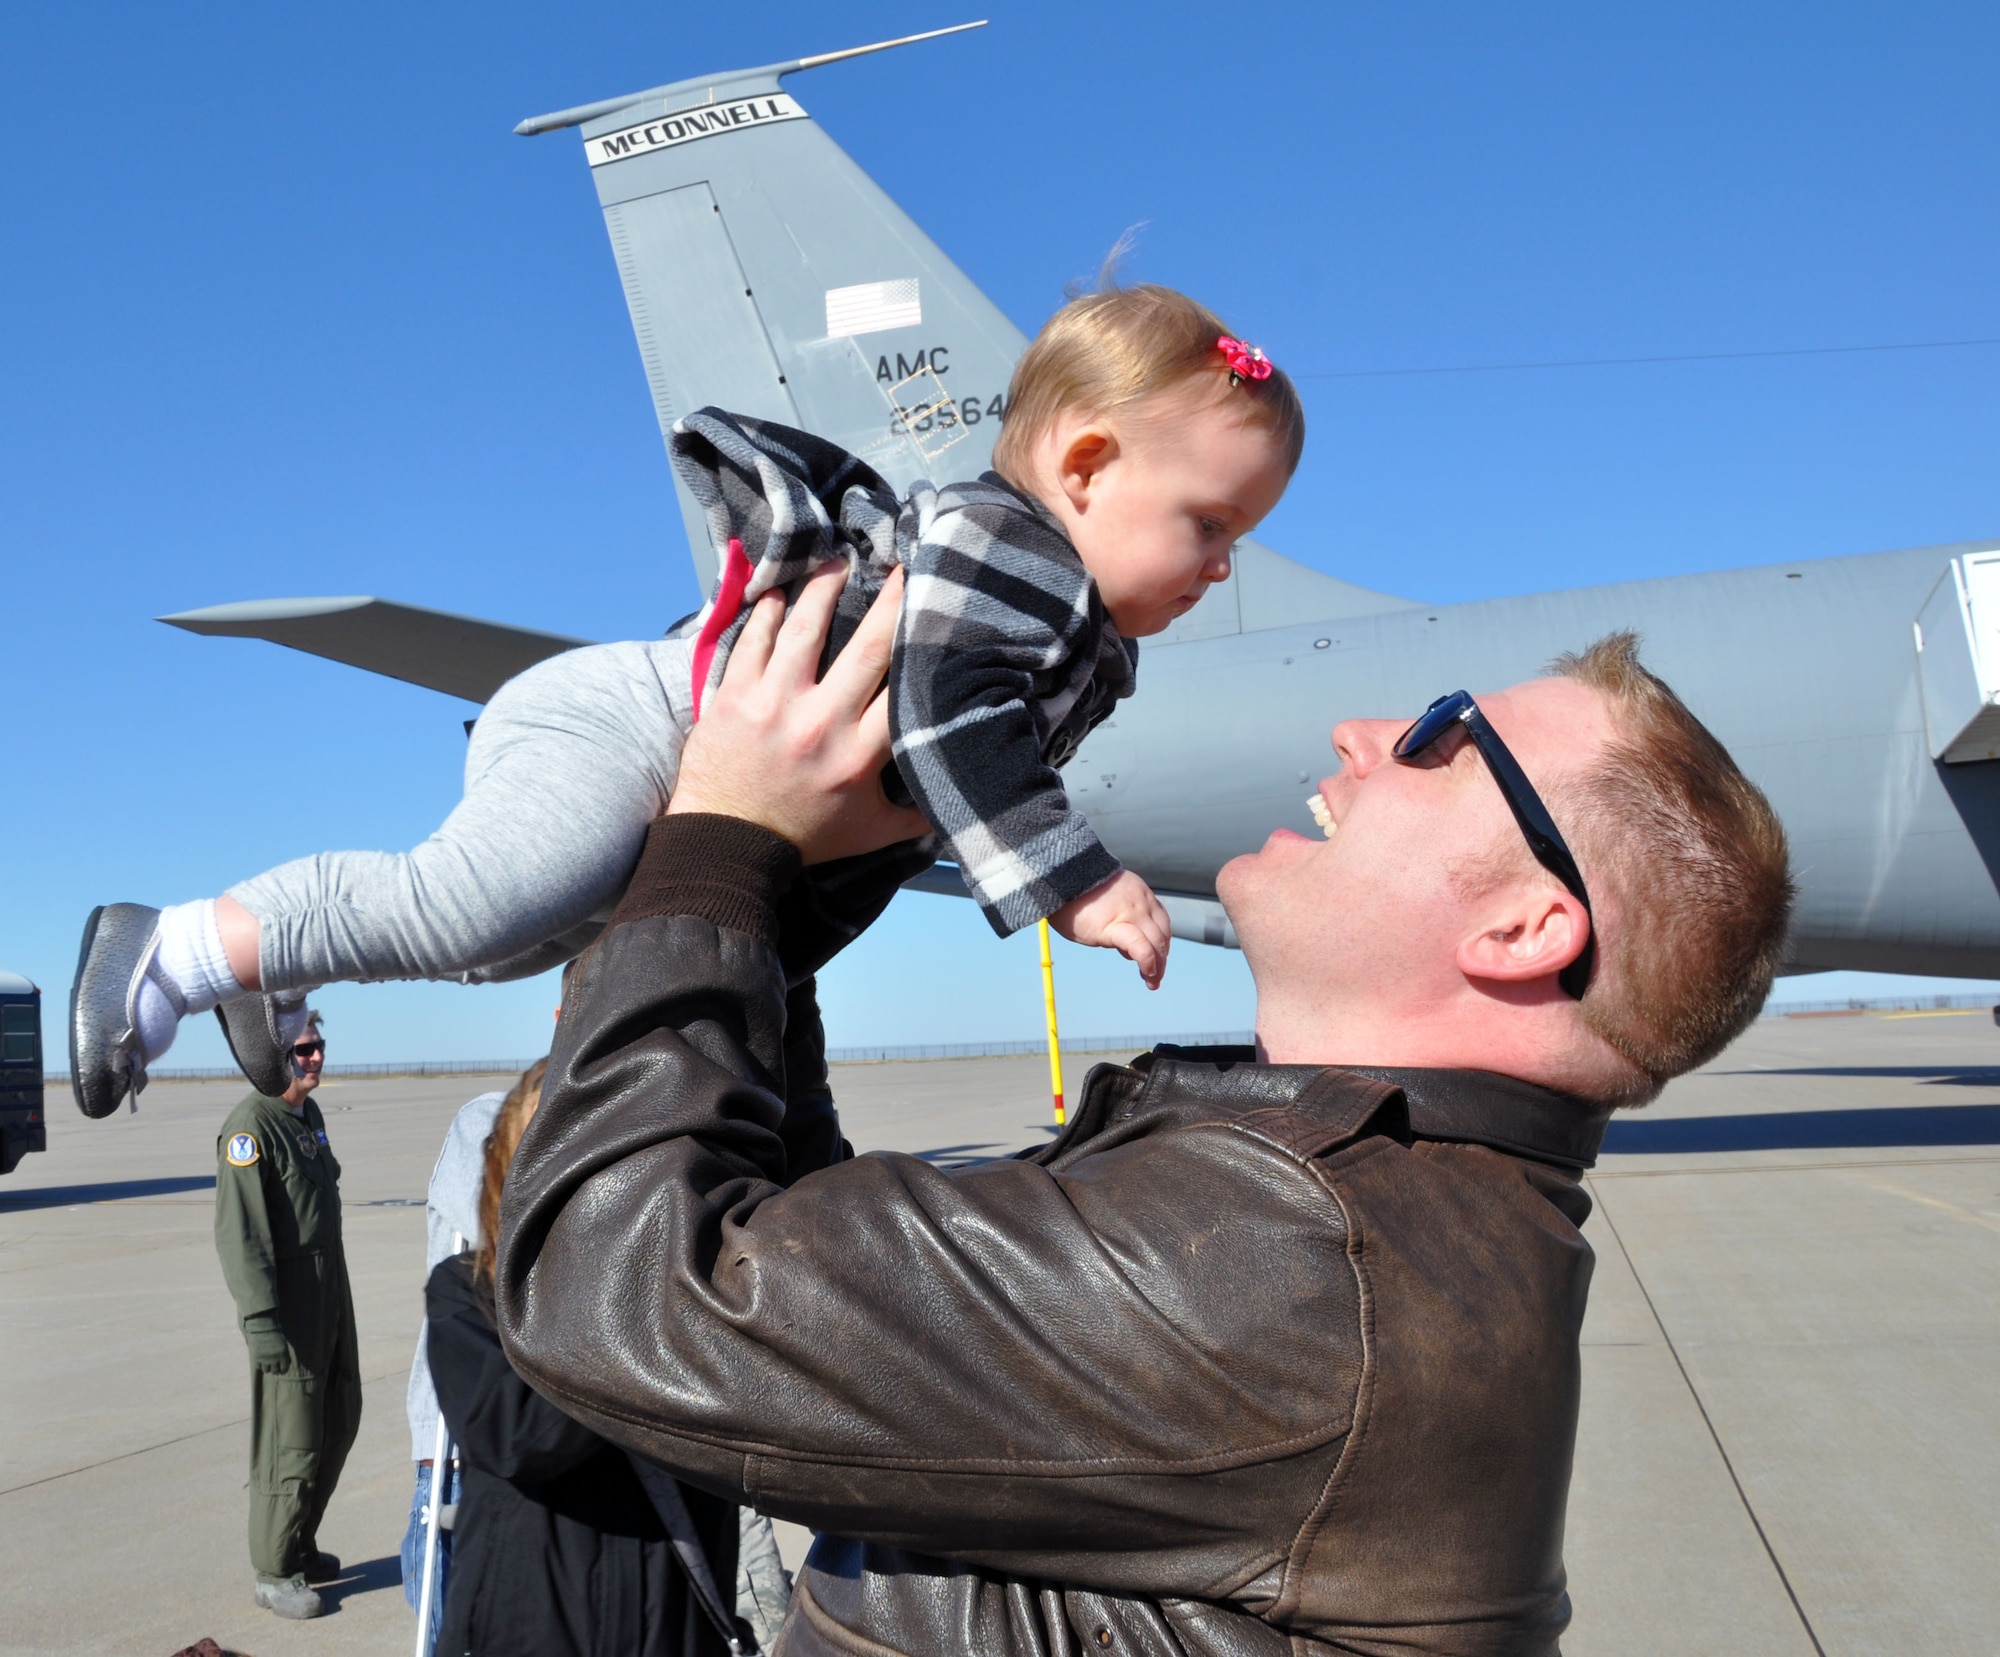 Tech. Sgt. Chris Norris, a refueling boom operator assigned to the 18th Air Refueling Squadron, 931st Air Refueling Group, greets his infant daughter, Bailey, on the flightline at McConnell Air Force Base, Kan., Nov. 12, 2012. Norris had just returned from serving for more than two months deployed as a member of the 90th Expeditionary Air Refueling Squadron at Incirlik Air Base, Turkey. (U.S. Air Force photo by 1st Lt. Zach Anderson)